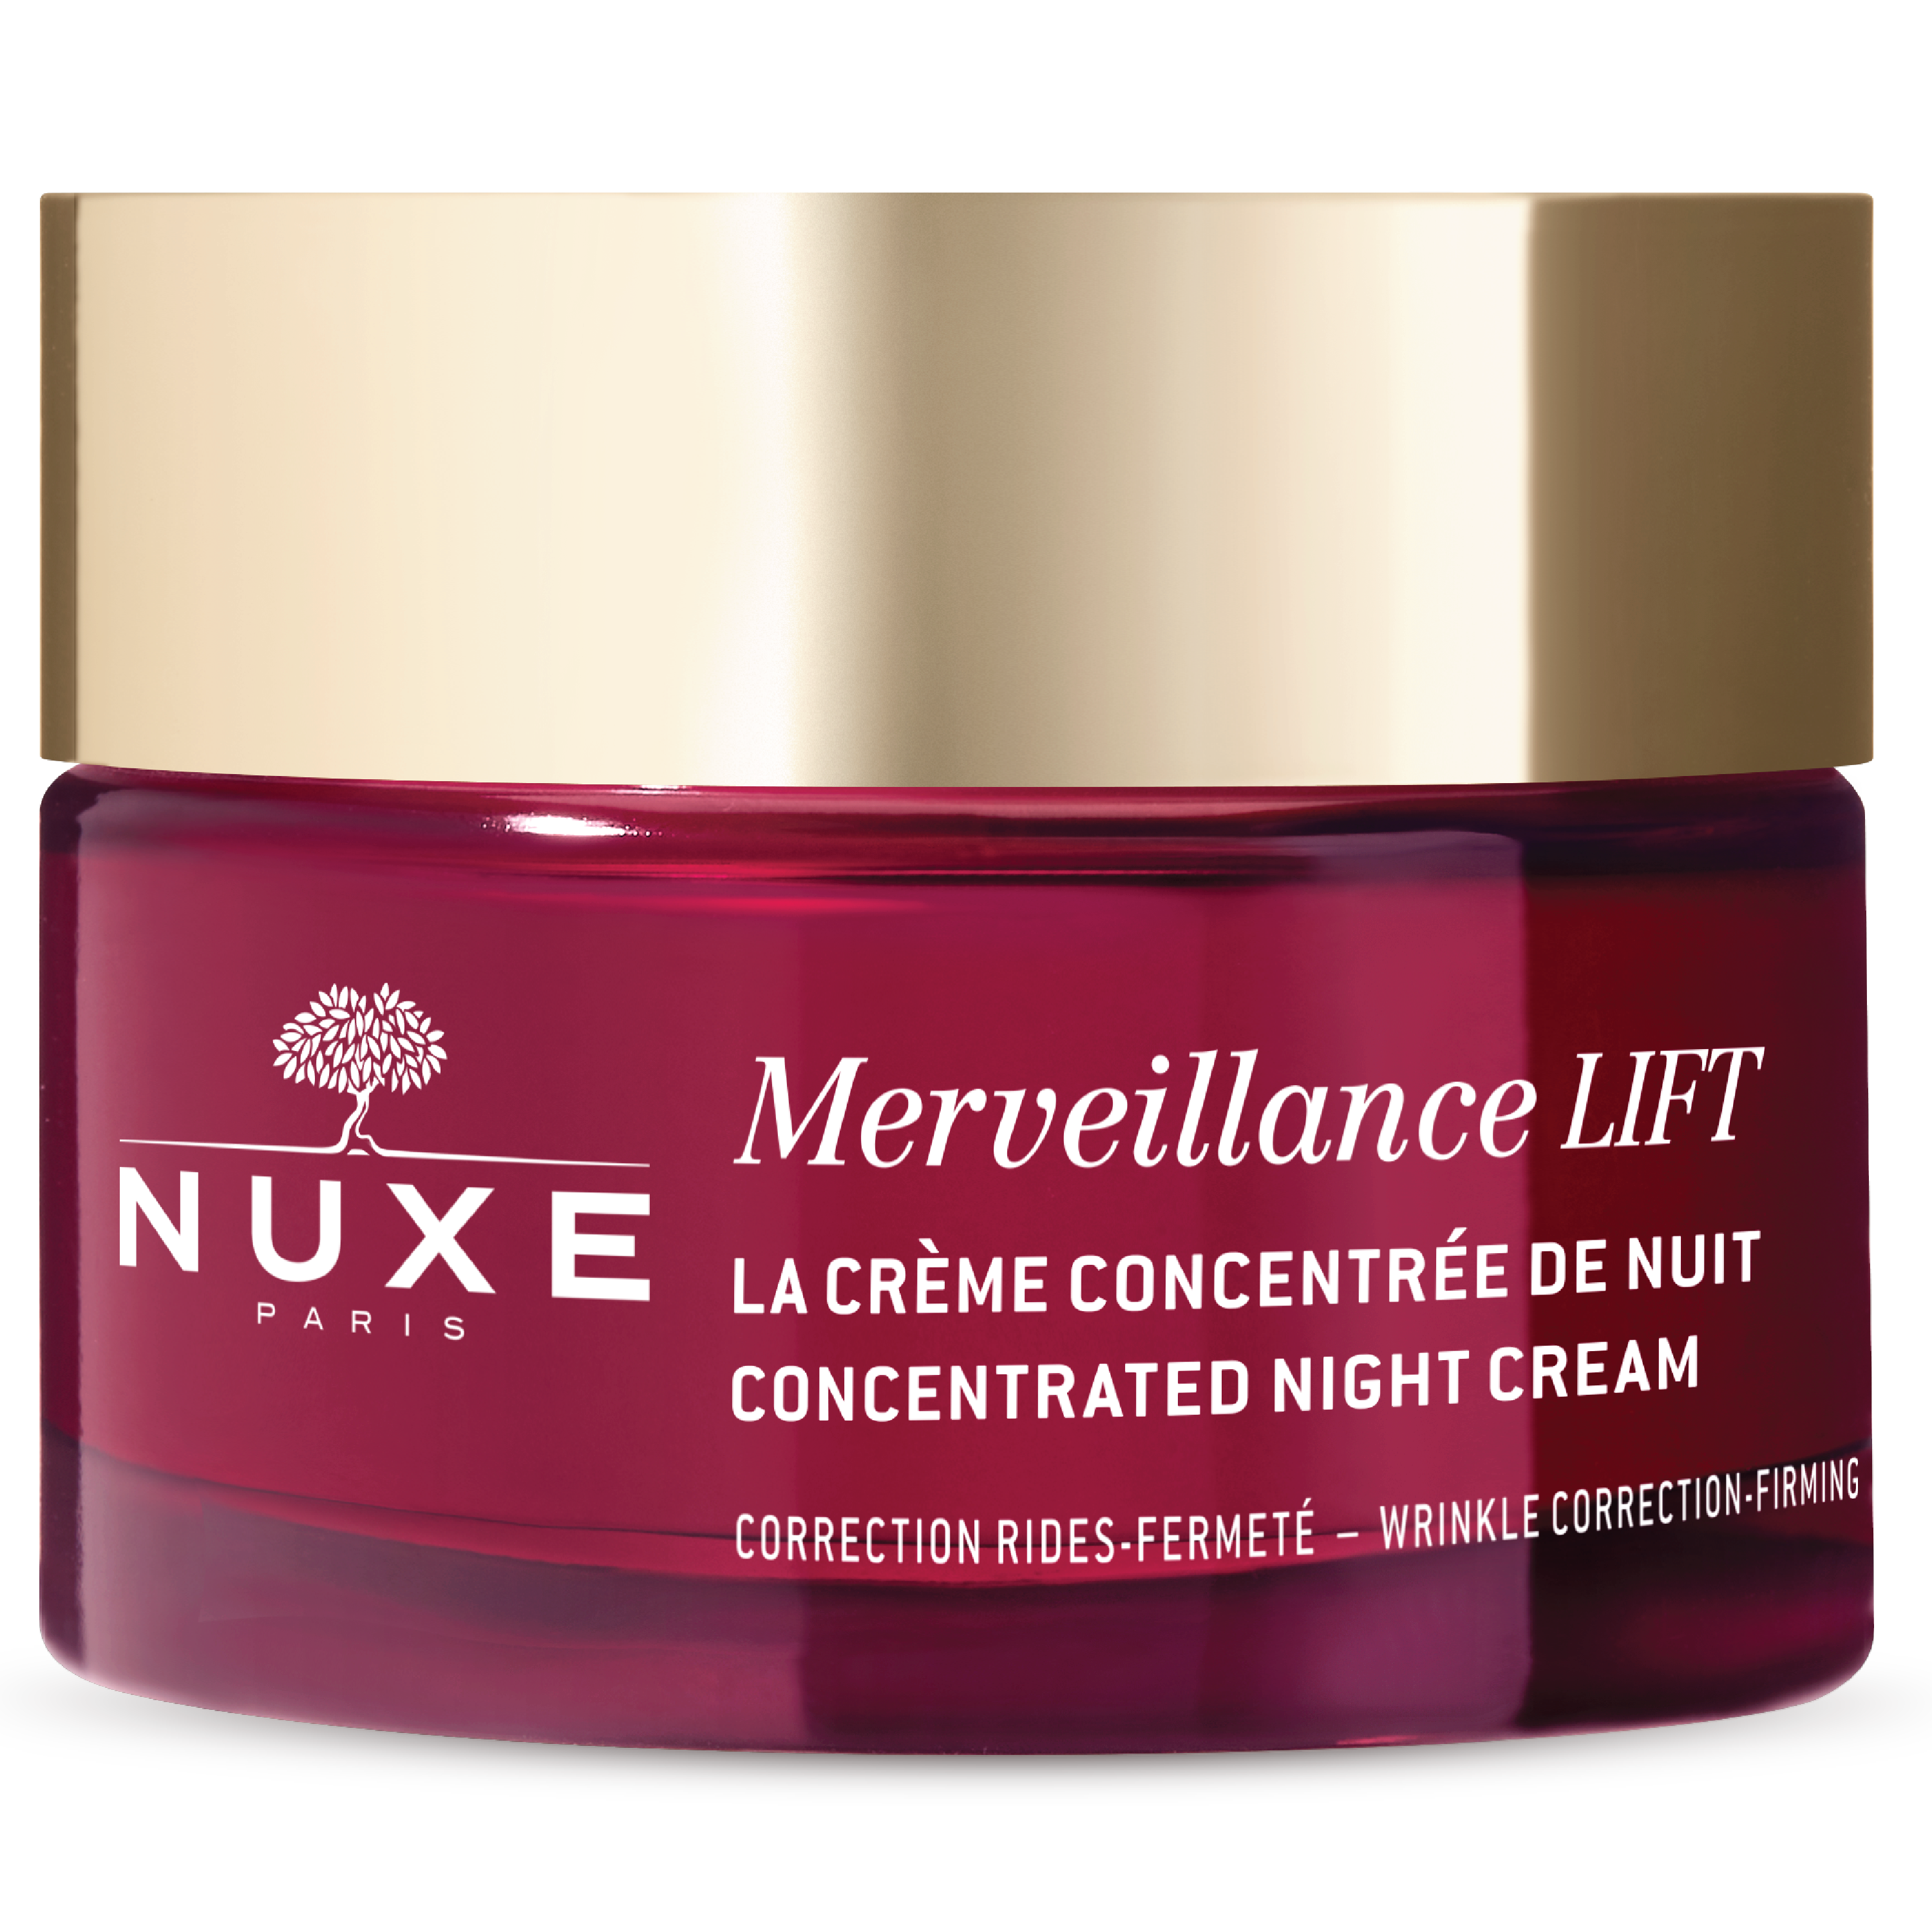 NUXE Merveillance Lift Concentrated Night Cream, 50 ml